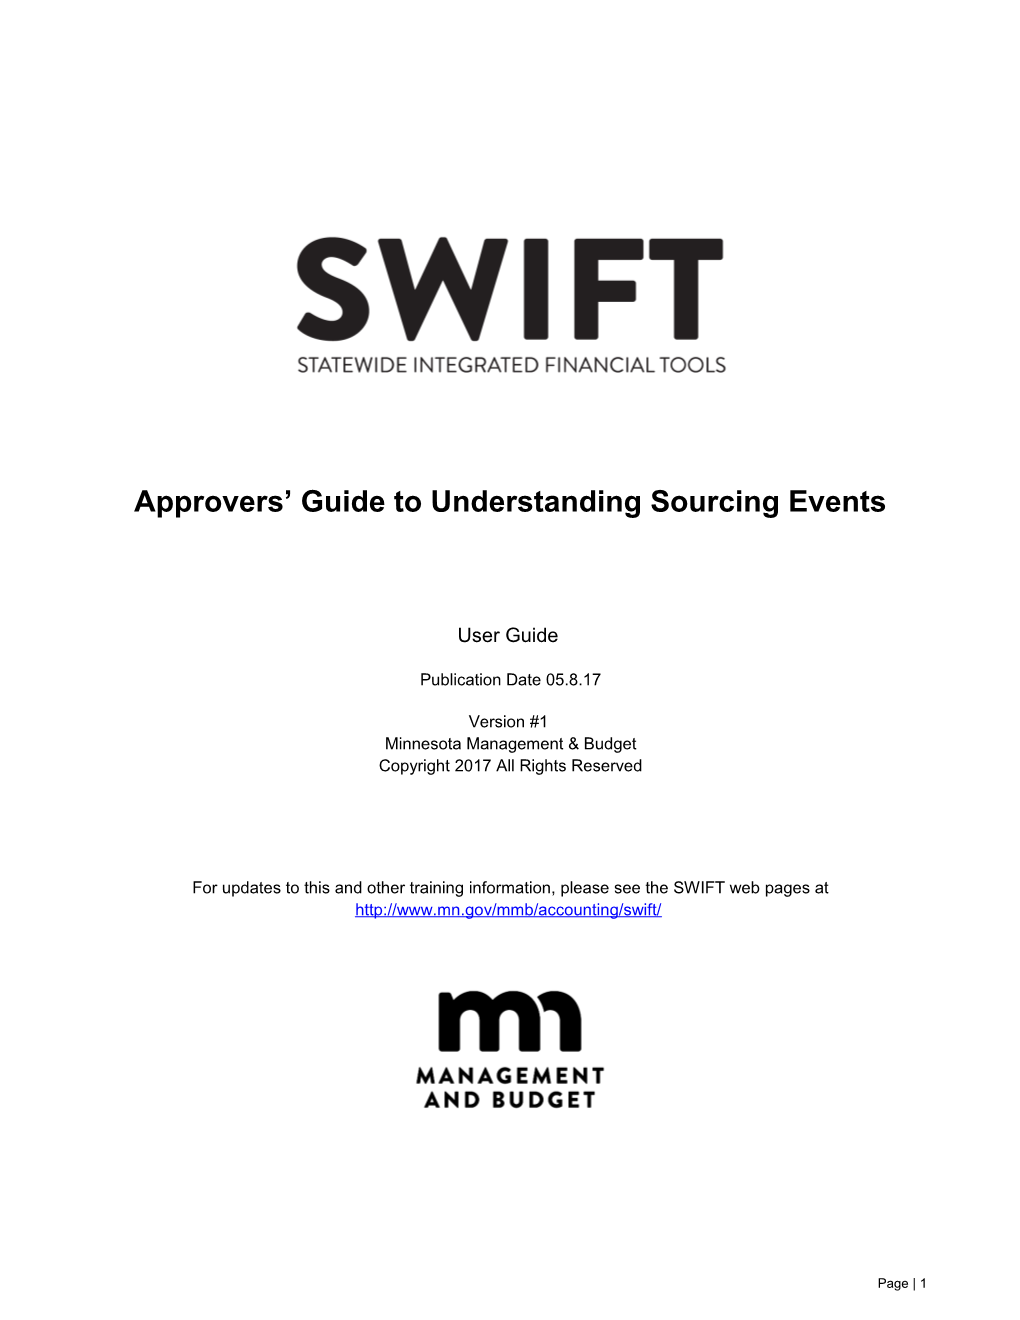 Approvers Guide to Understanding Sourcing Events